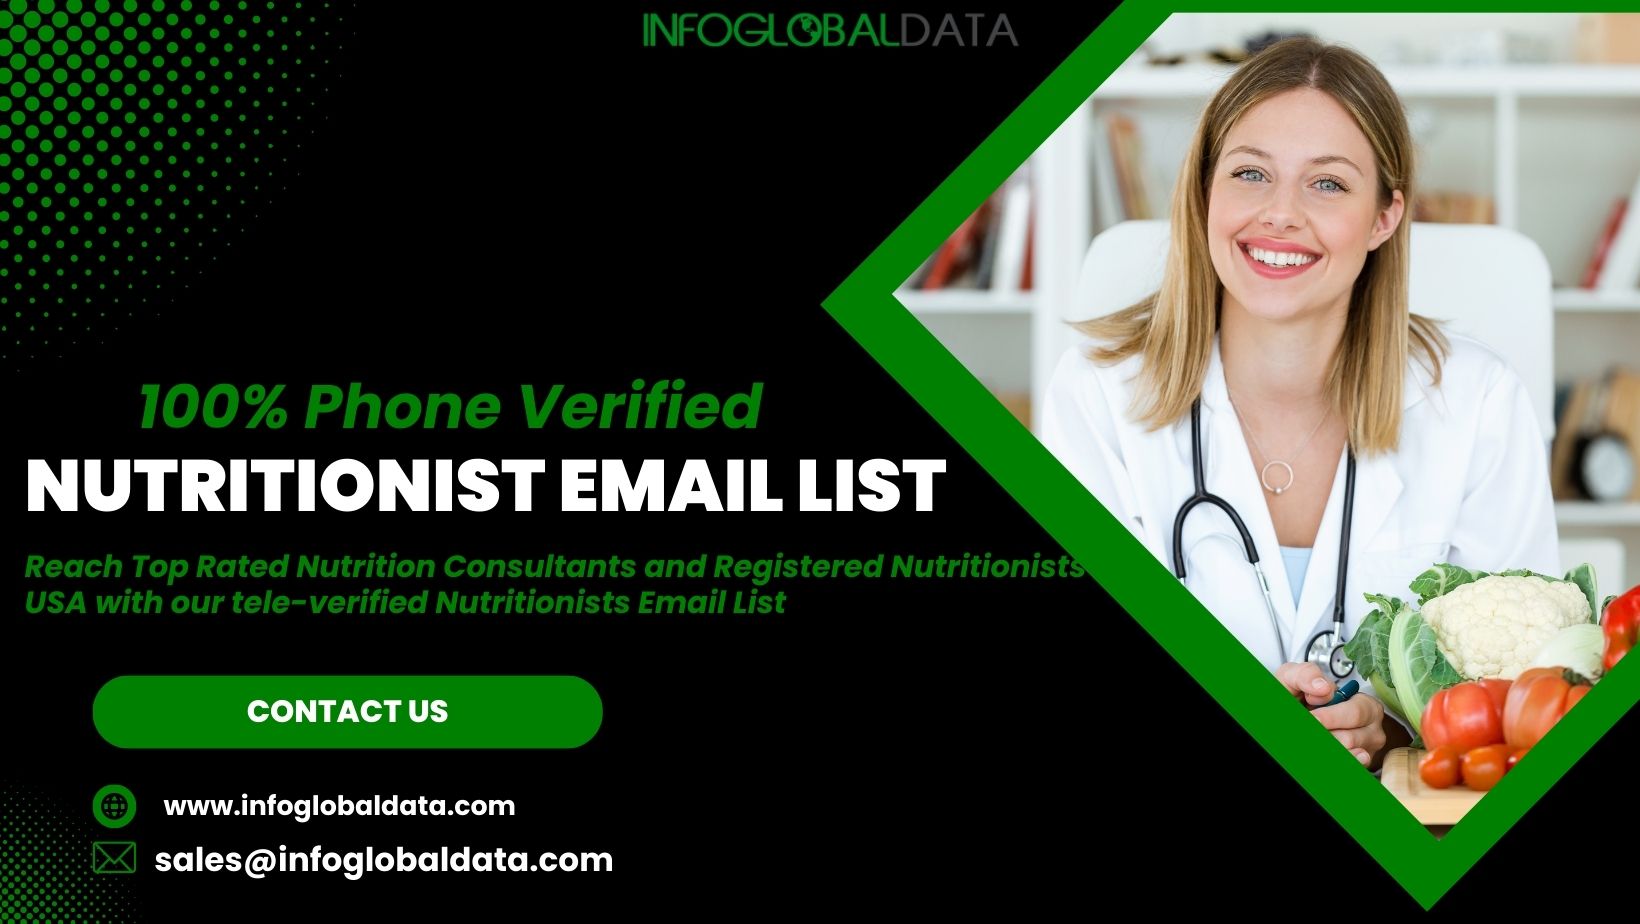 The Best Practices for Measuring the ROI of Your Nutritionist Email List